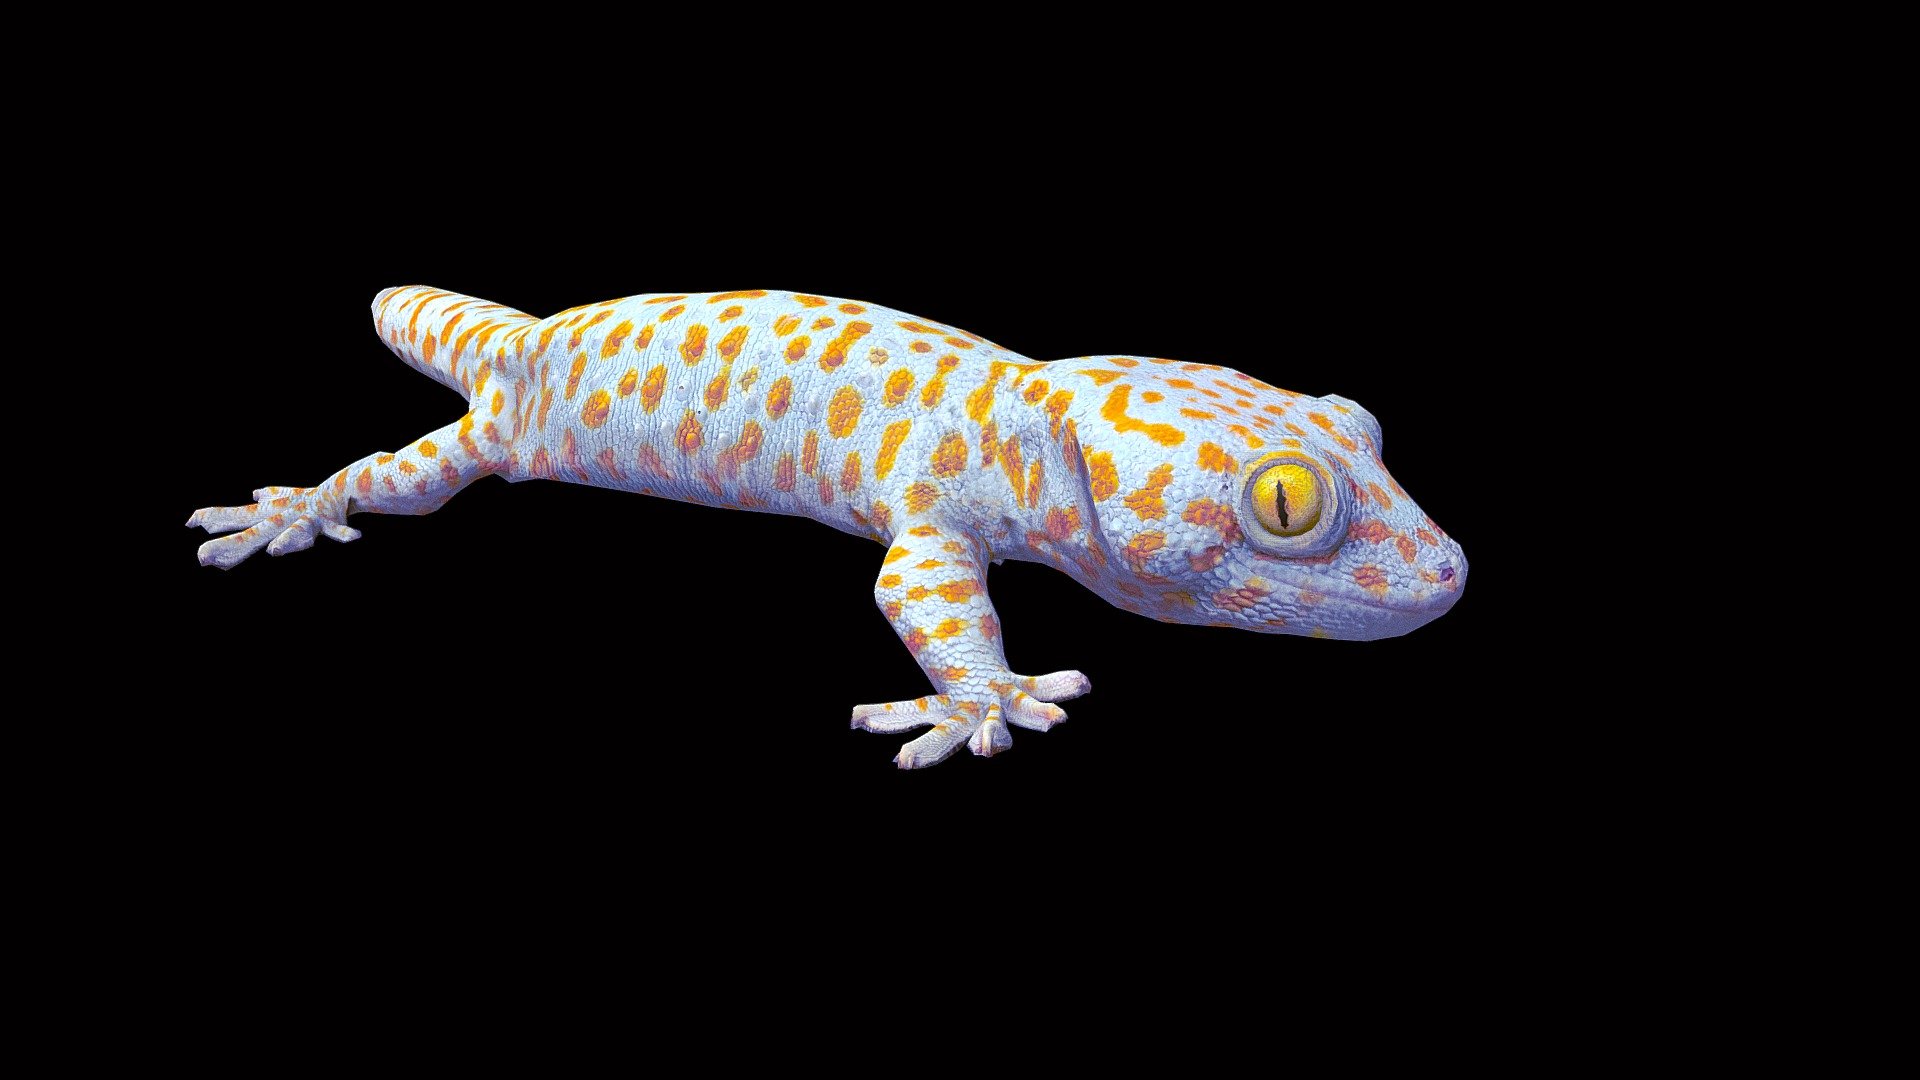 How The Digital Life Project Turned a Living Gecko Into a 3D Animation -  Sketchfab Community Blog - Sketchfab Community Blog